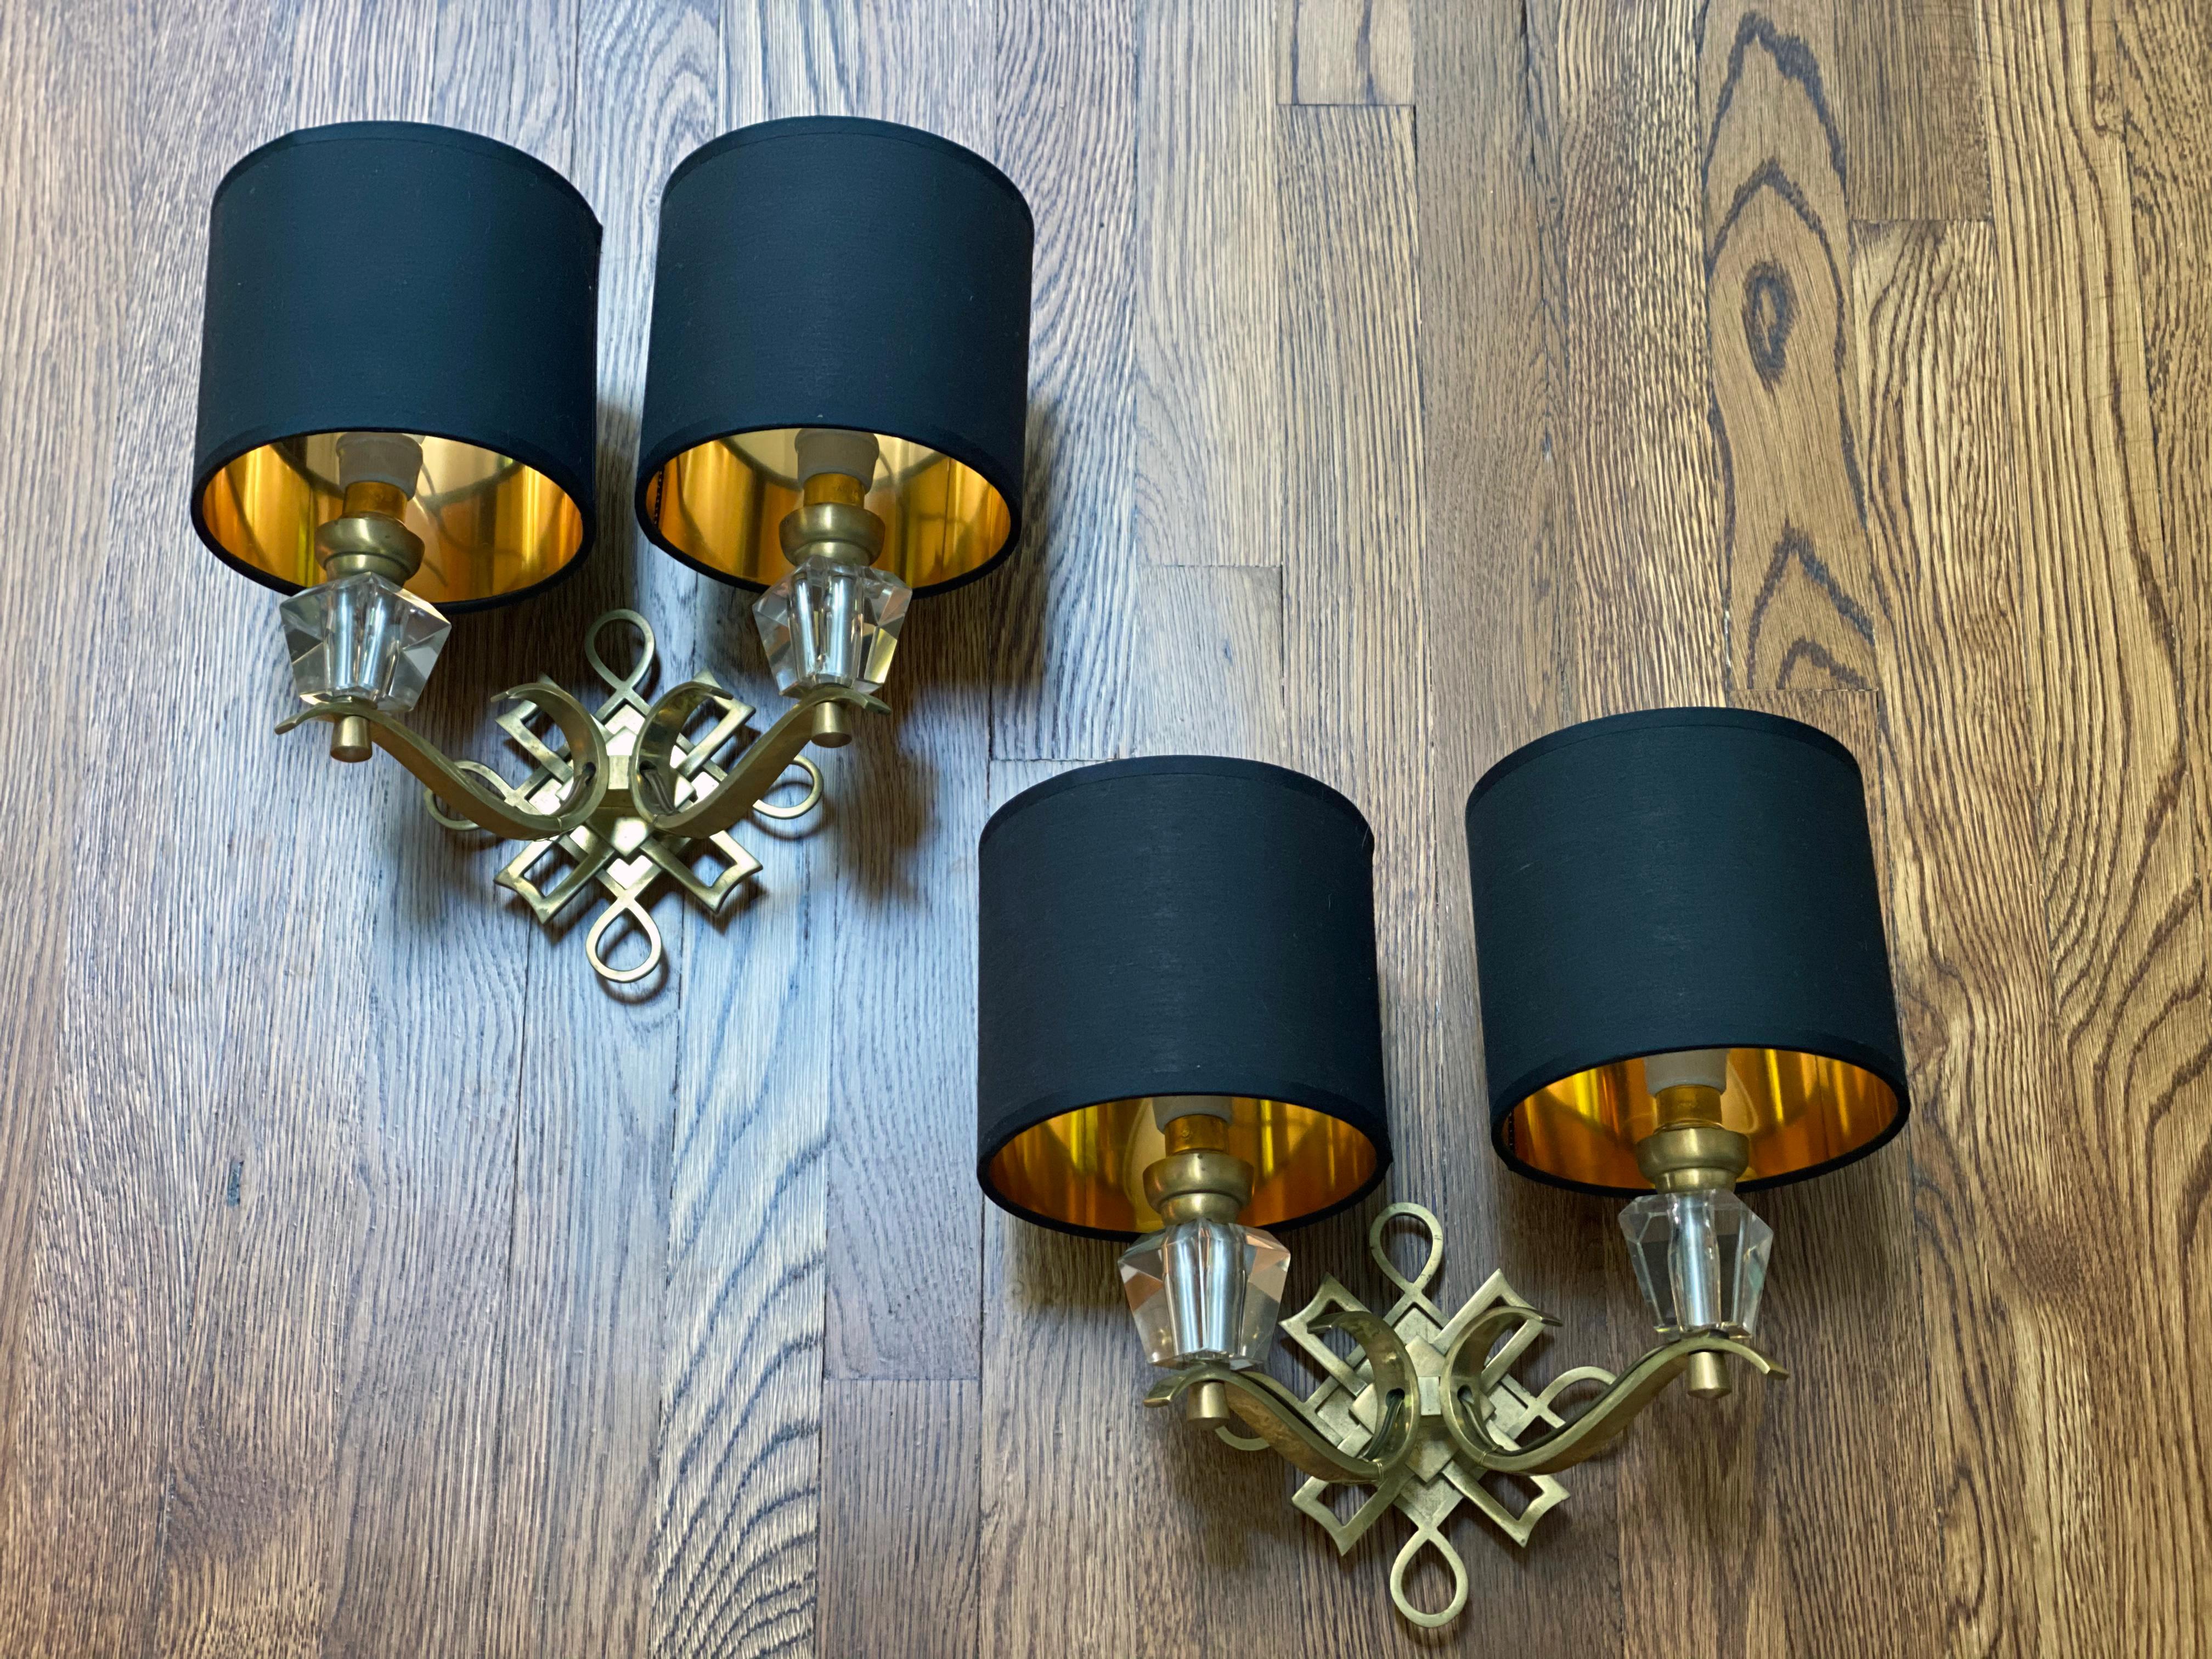 Jules Leleu polished brass and glass pair of sconces, attributed to Jules Leleu. Three pairs available. Professionally rewired. Original porcelain socket. Total of 6 sconces available. Sold as a set of six.